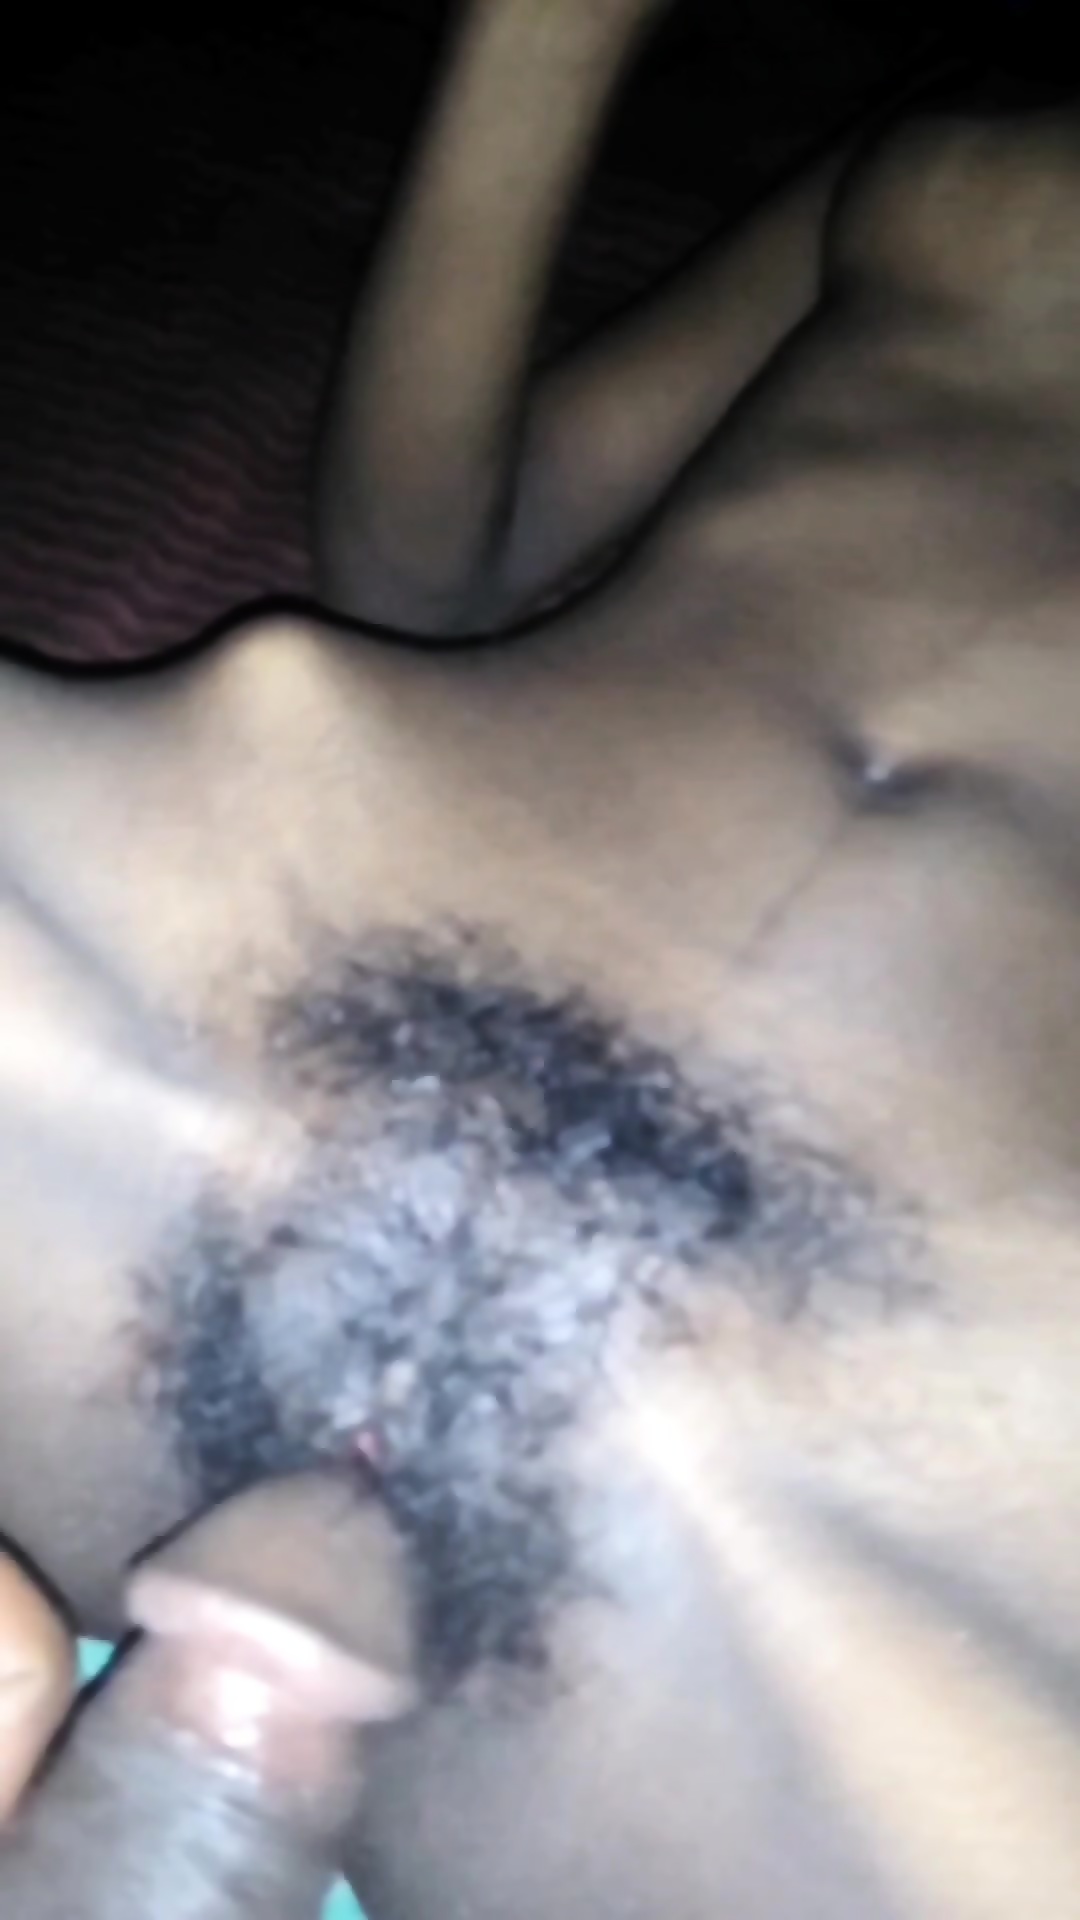 Indian Desi Tamil My Wife Hot Black Hairy Pussy Hard Fucking Cute Boob pic pic